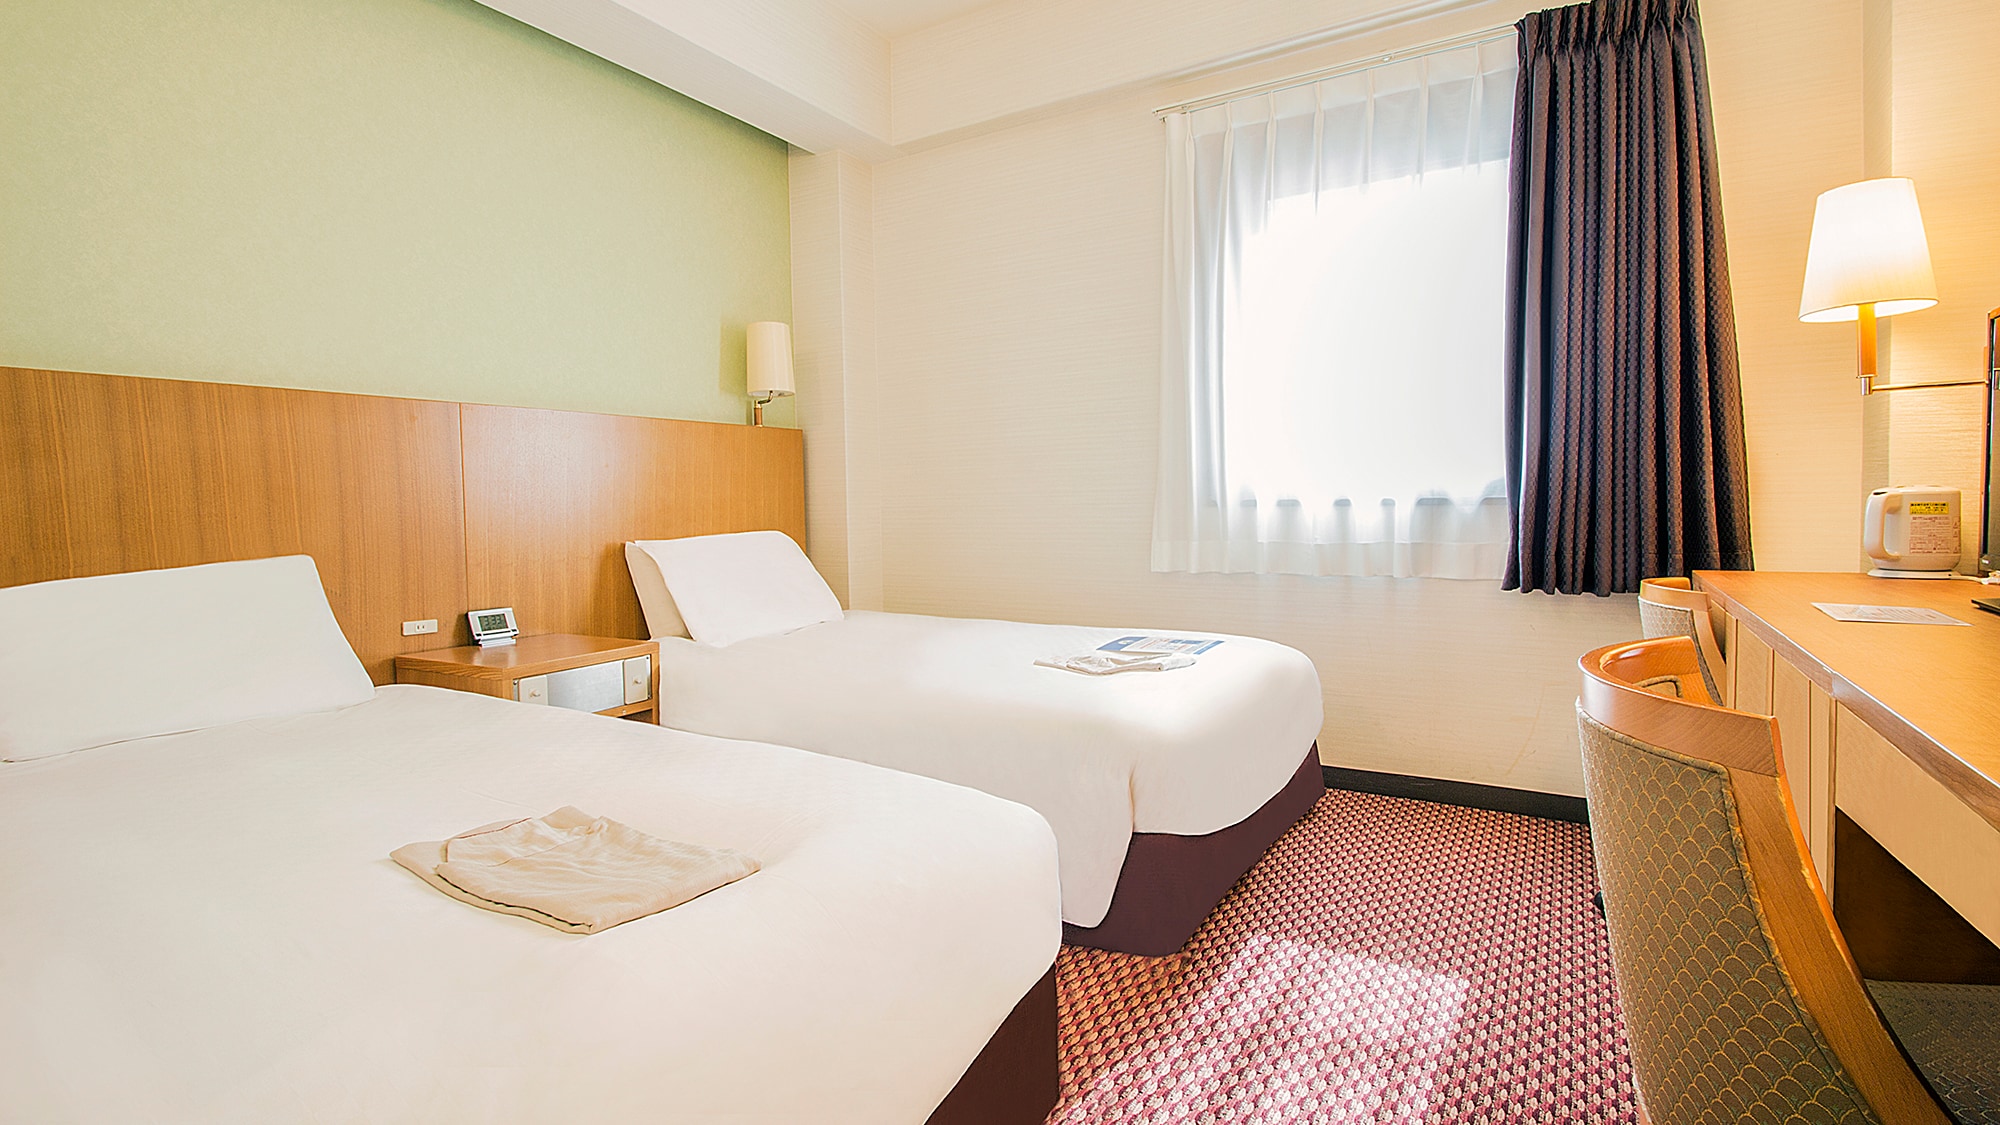 ■ Twin room (main building): 16㎡ ・ 110cm & times; 195cm & times; 2 (made by Simmons) beds are available.